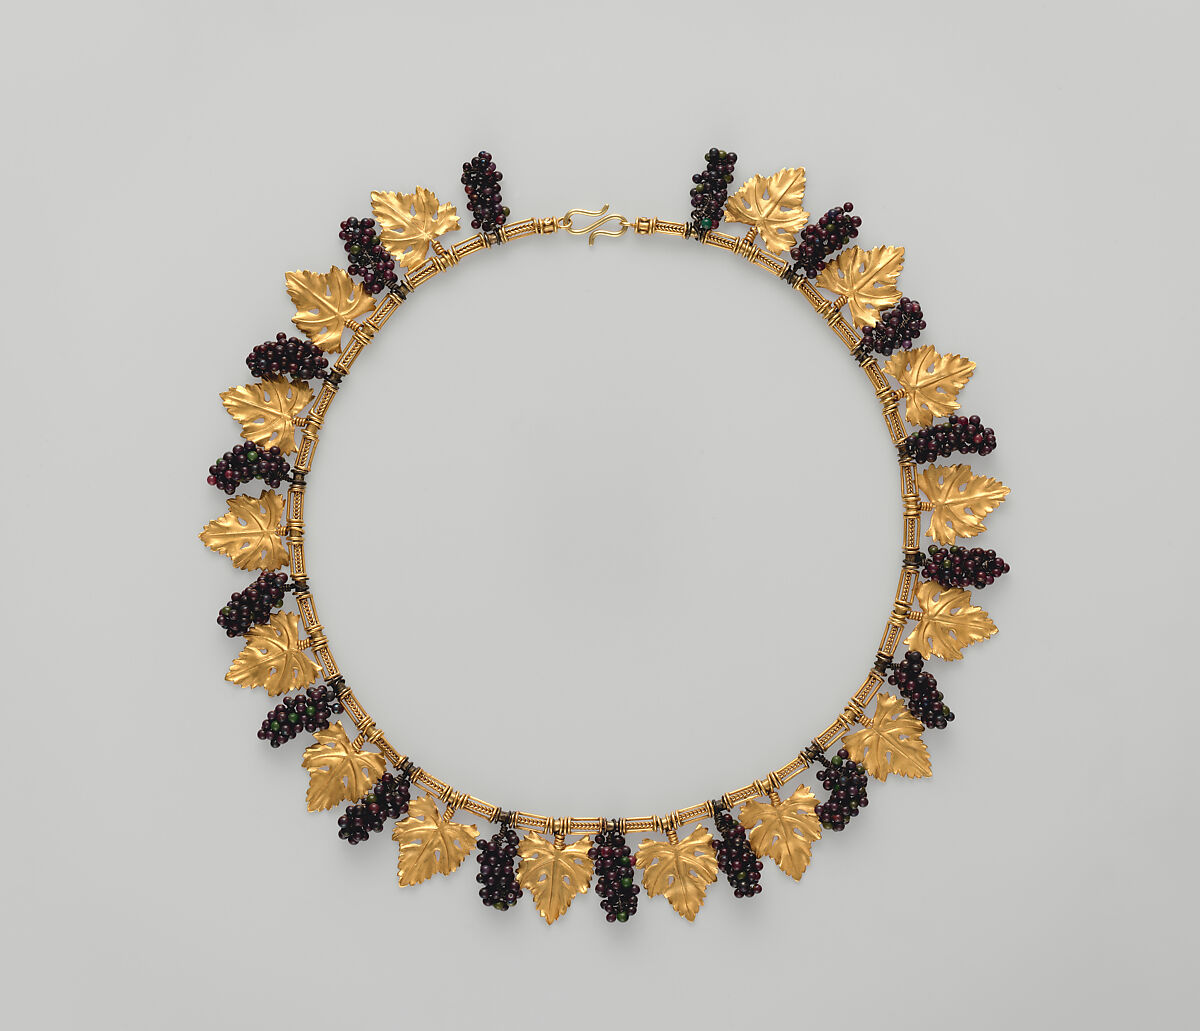 Archaeological revival necklace, Castellani, Gold, glass, Italian, Rome 